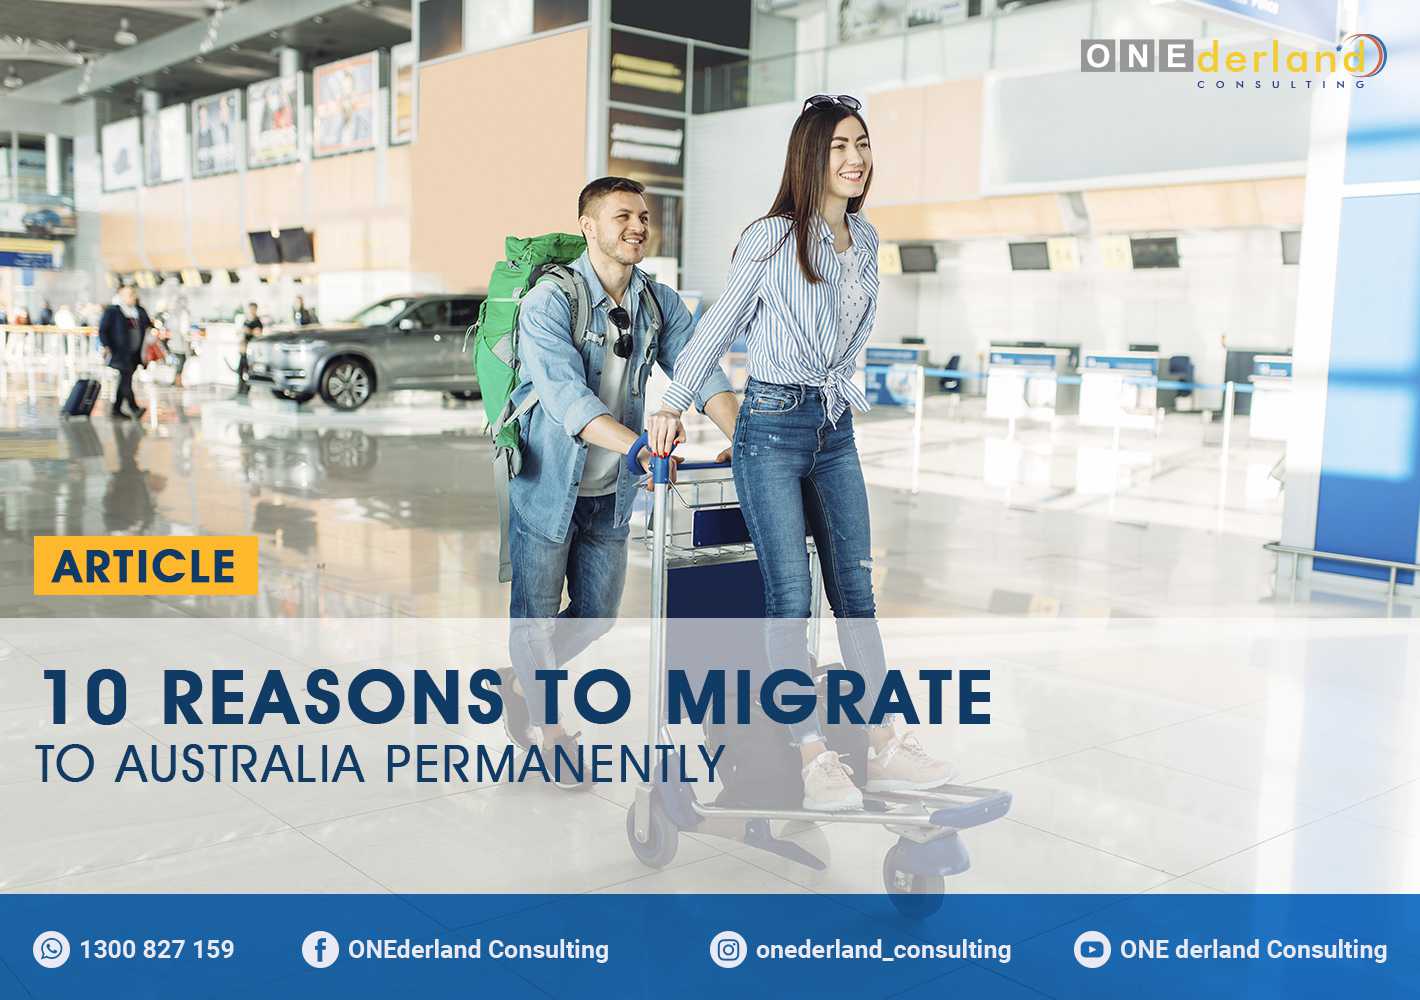 10 Reasons to Migrate to Australia Permanently.